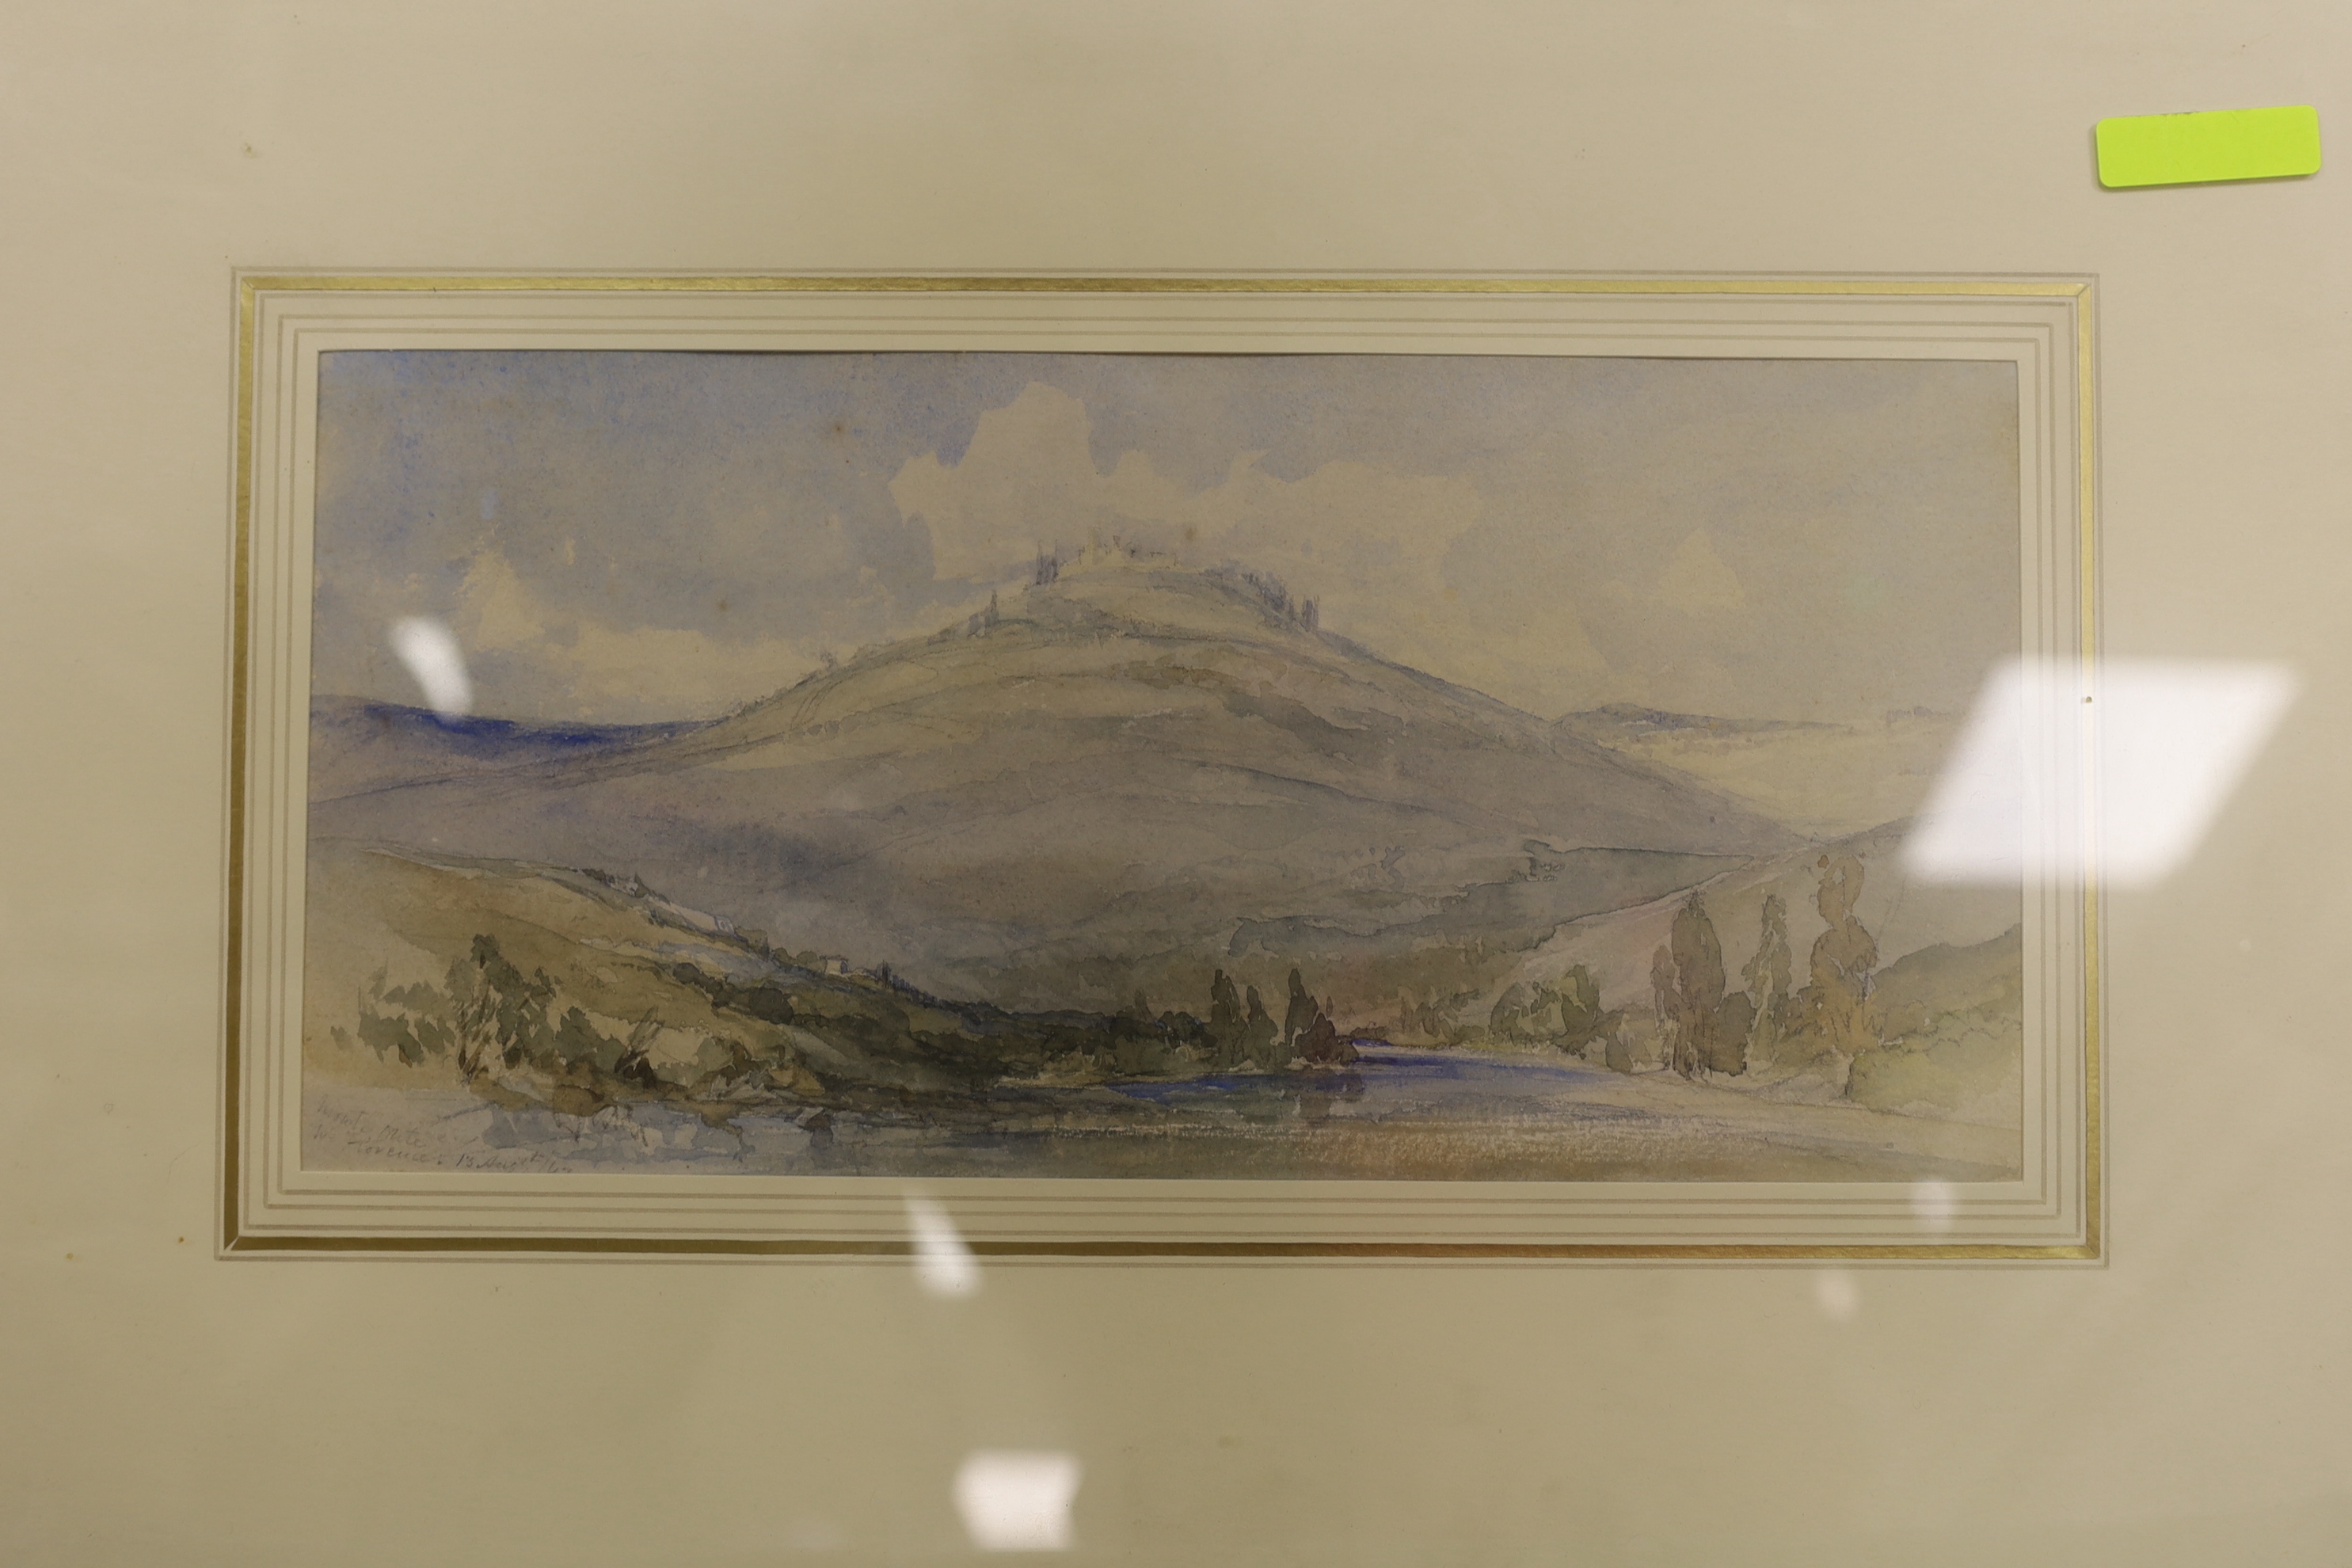 John Harper (1809-1842), watercolour, Landscape near Florence, inscribed by the artist, Abbott & Holder label verso, 14 x 29cm, together with a group of assorted paintings and prints